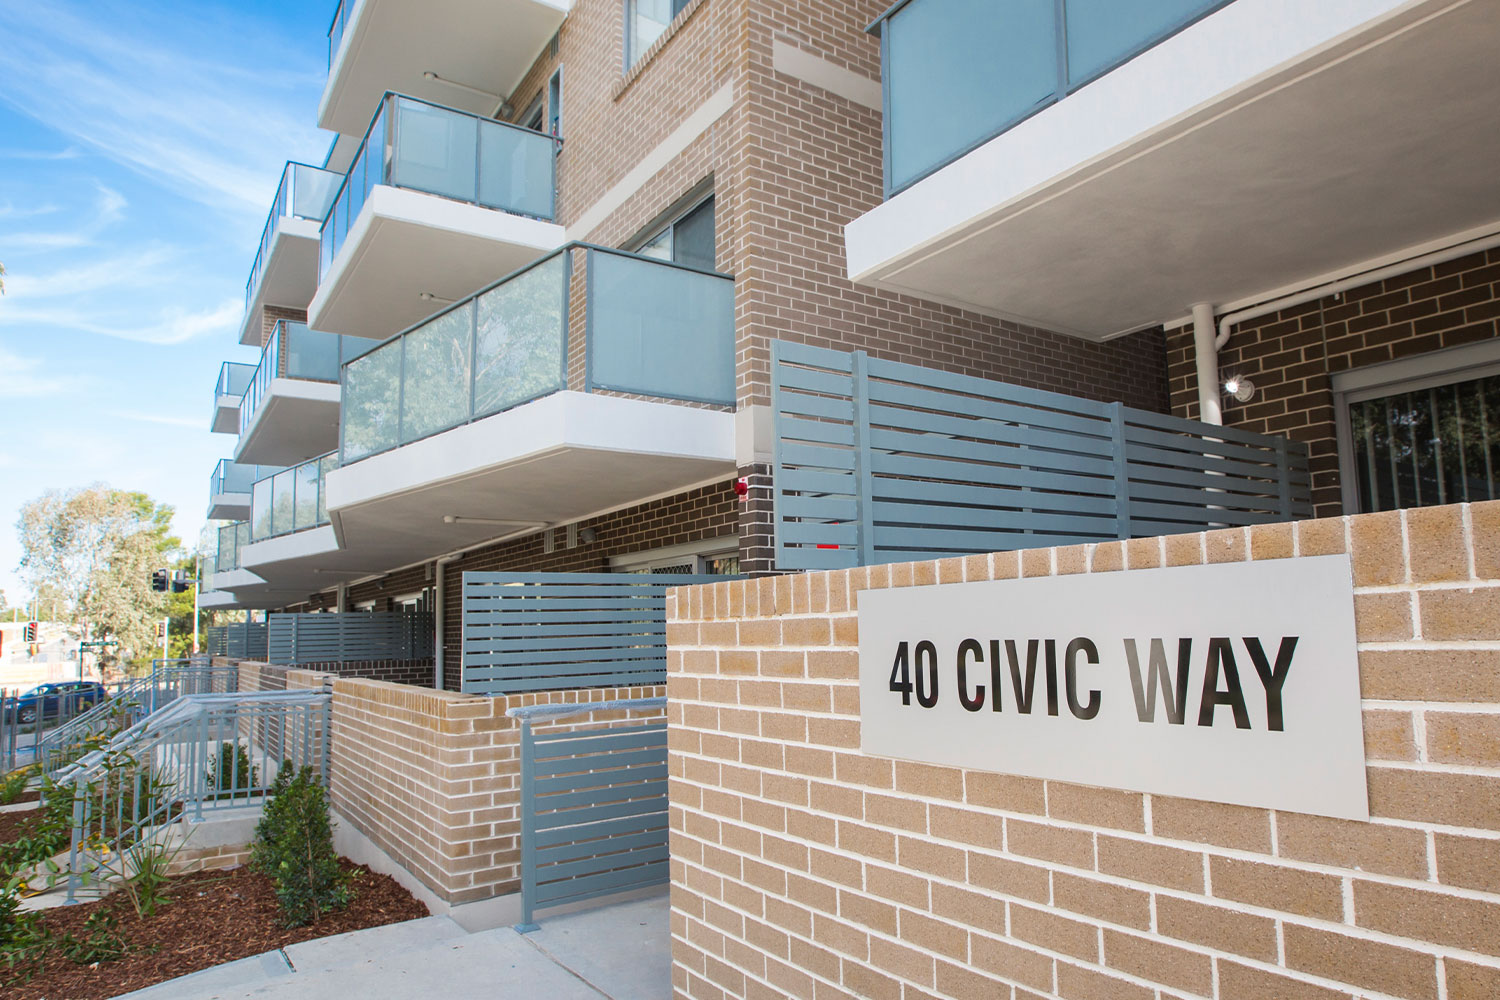 Civic Way, Rouse Hill Apartment complex